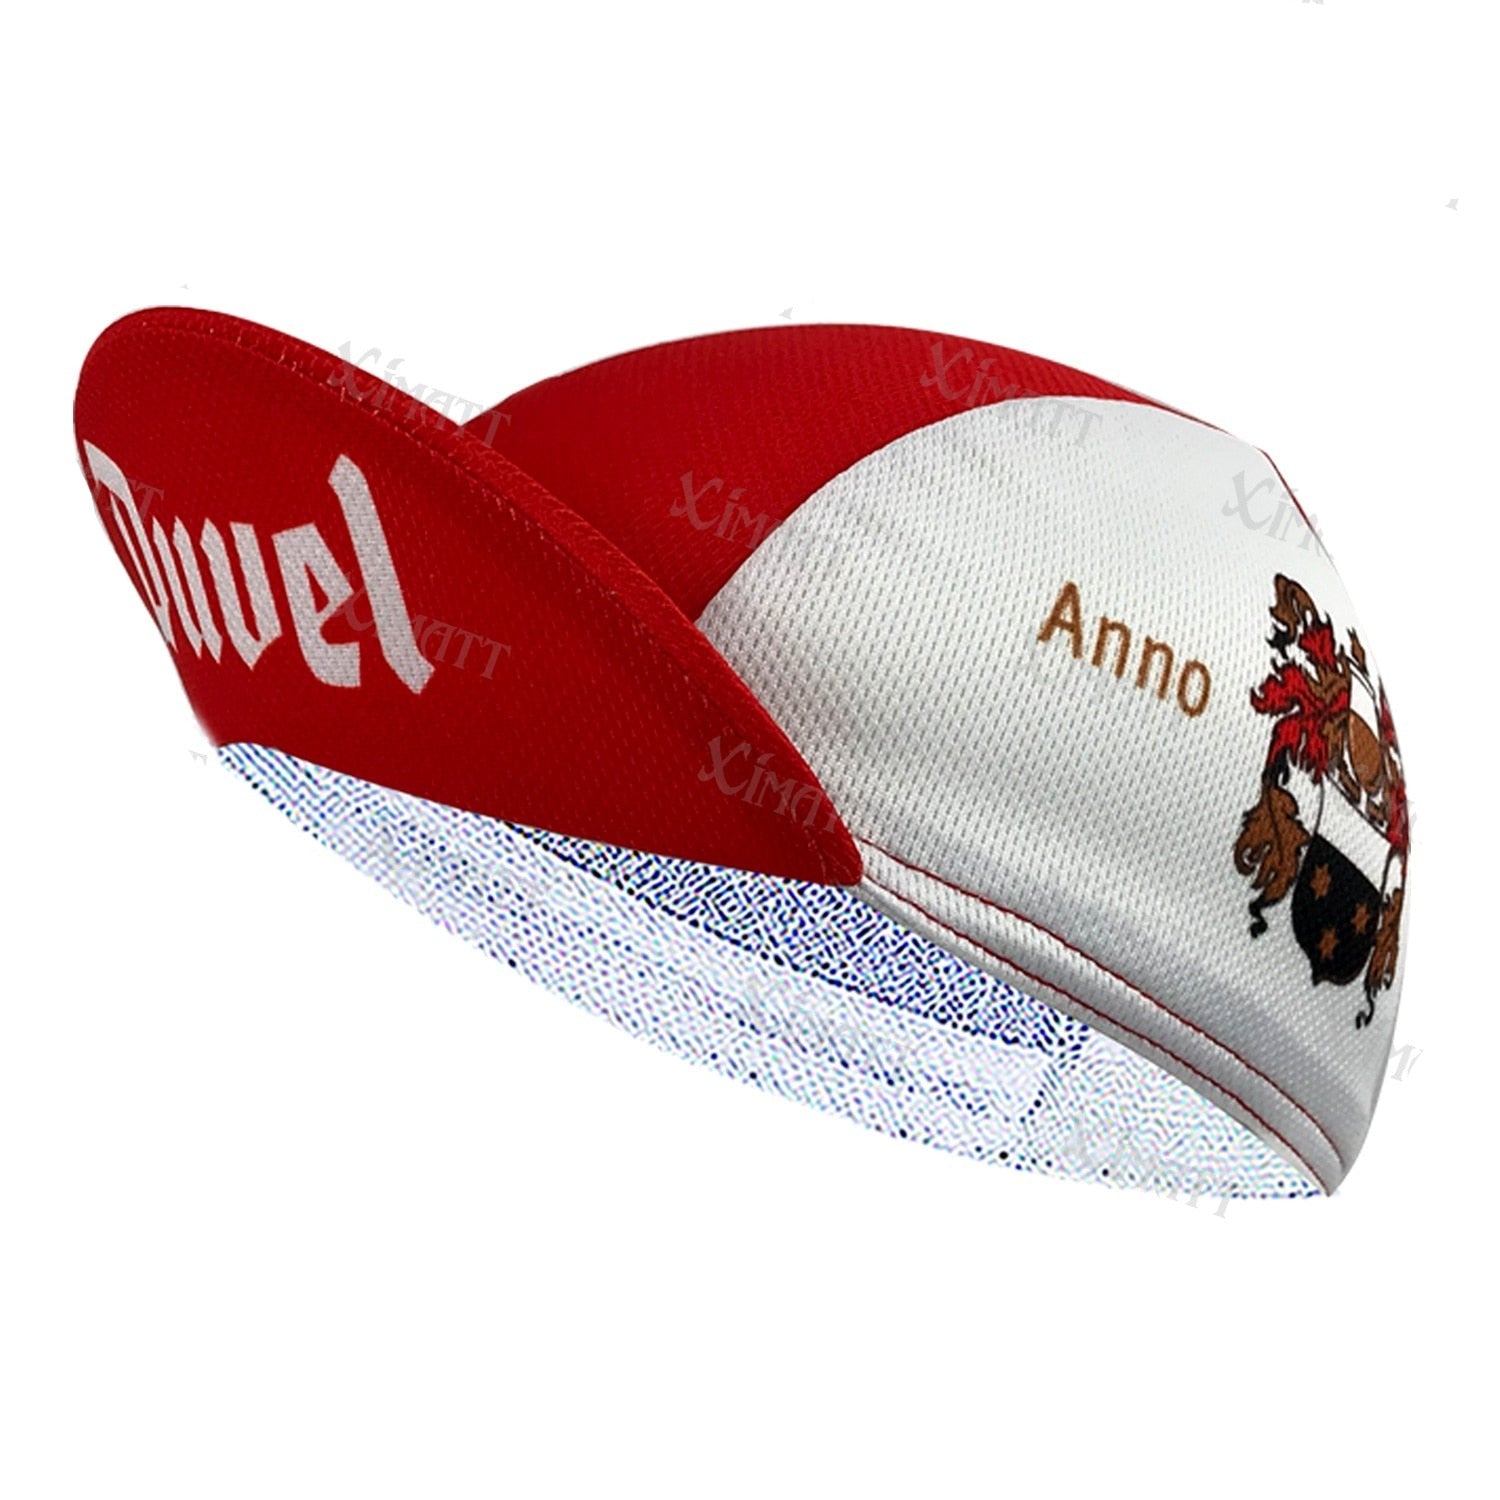 Classic Retro Polyester/Fleece Beer Cycling Caps Road Bike Nust Be Equipped Sun Visor Red White Black Bicycle Balaclava